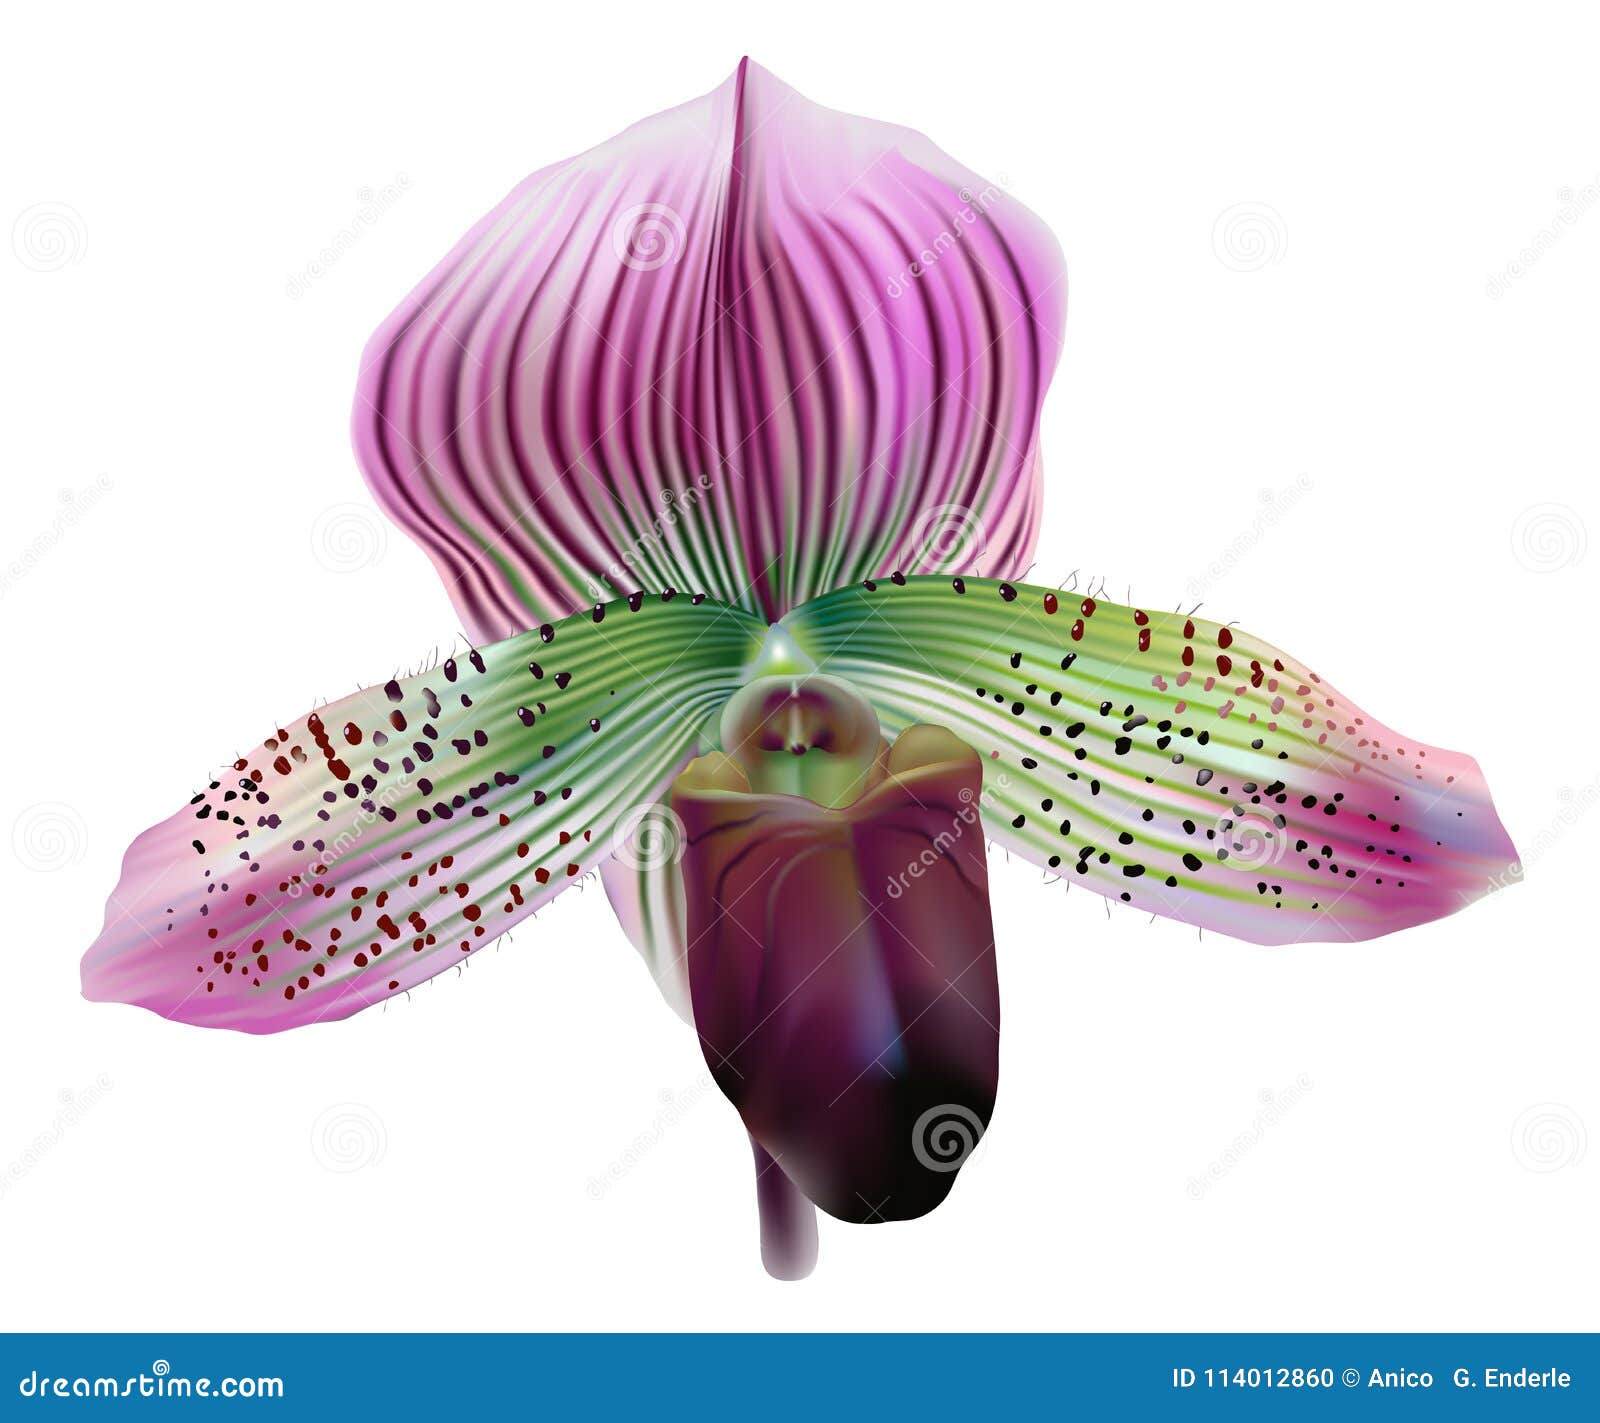 The Lady Slipper Orchid